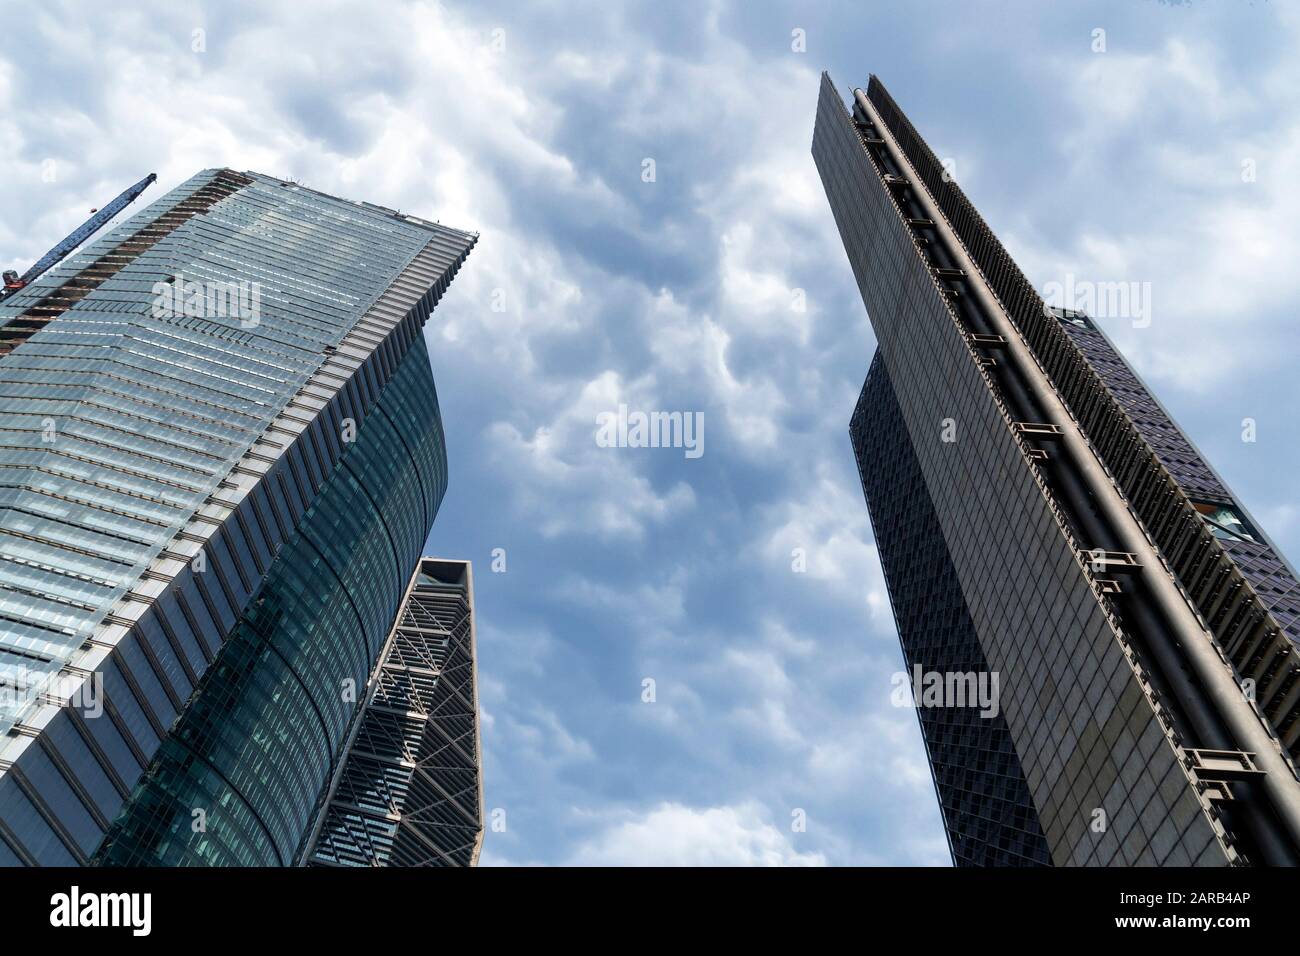 mexico city financial district skyscrapers detail Stock Photo